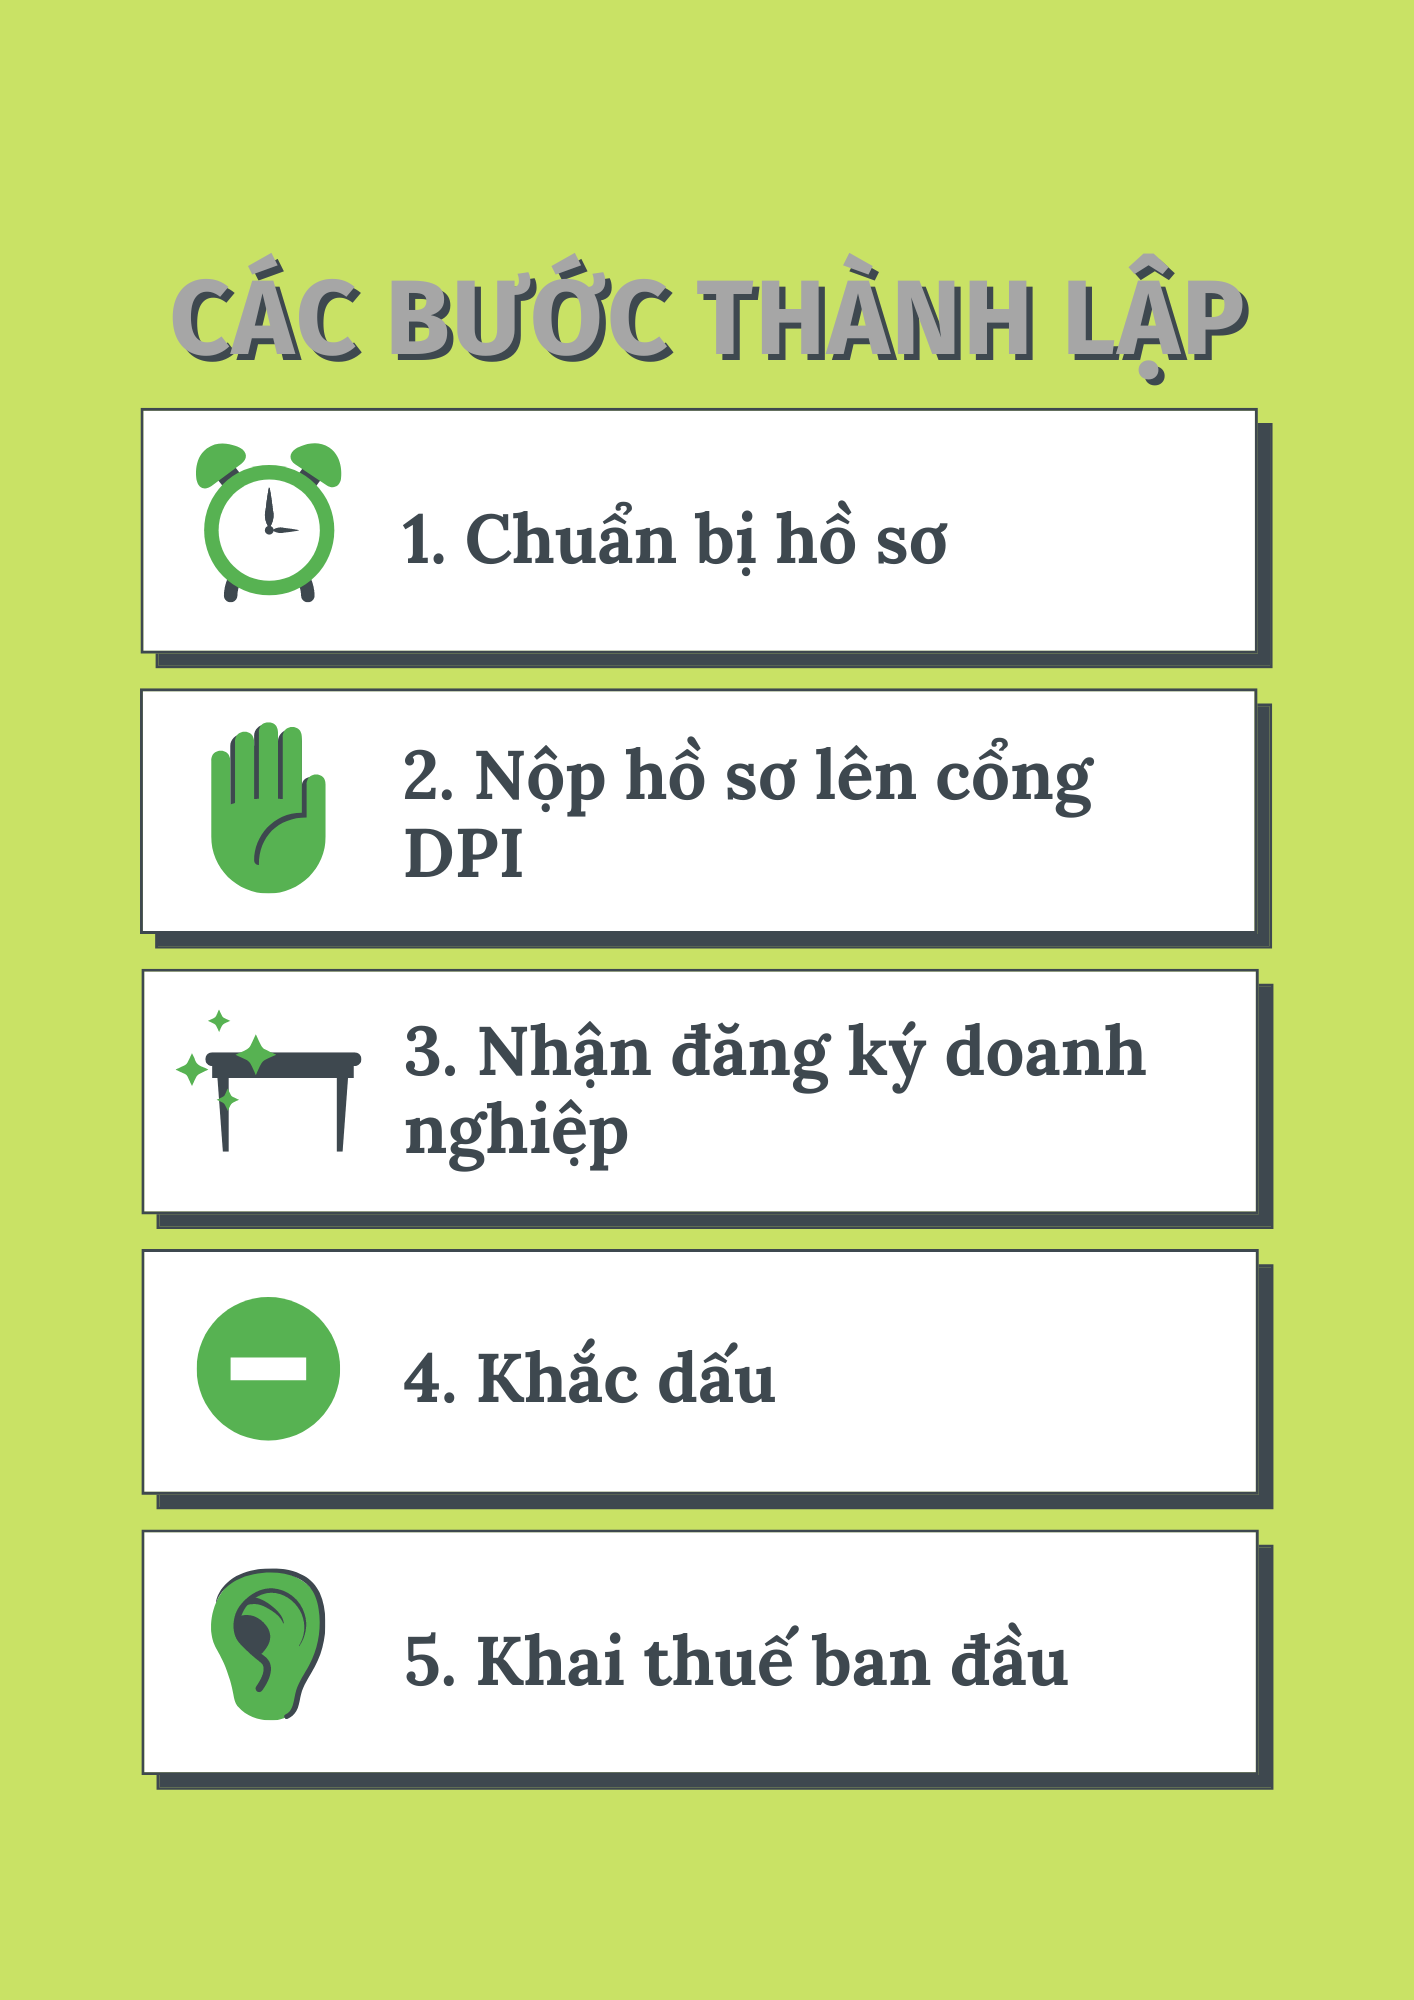 cac buoc thanh lap mot cong ty moi - lhd law firm